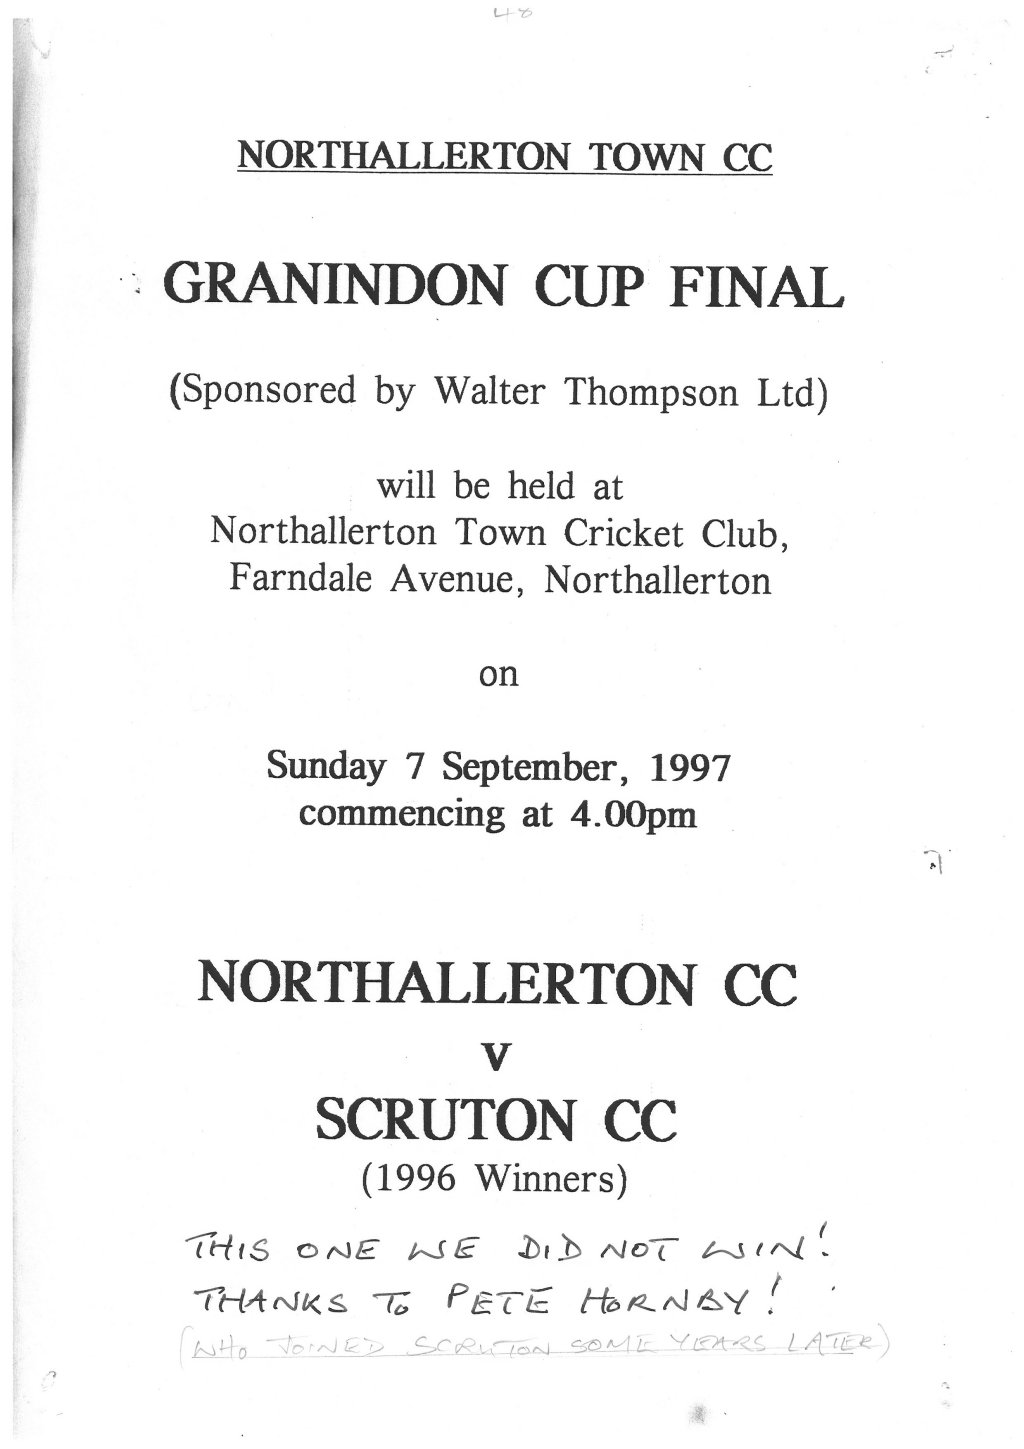 Granindon Cup losers